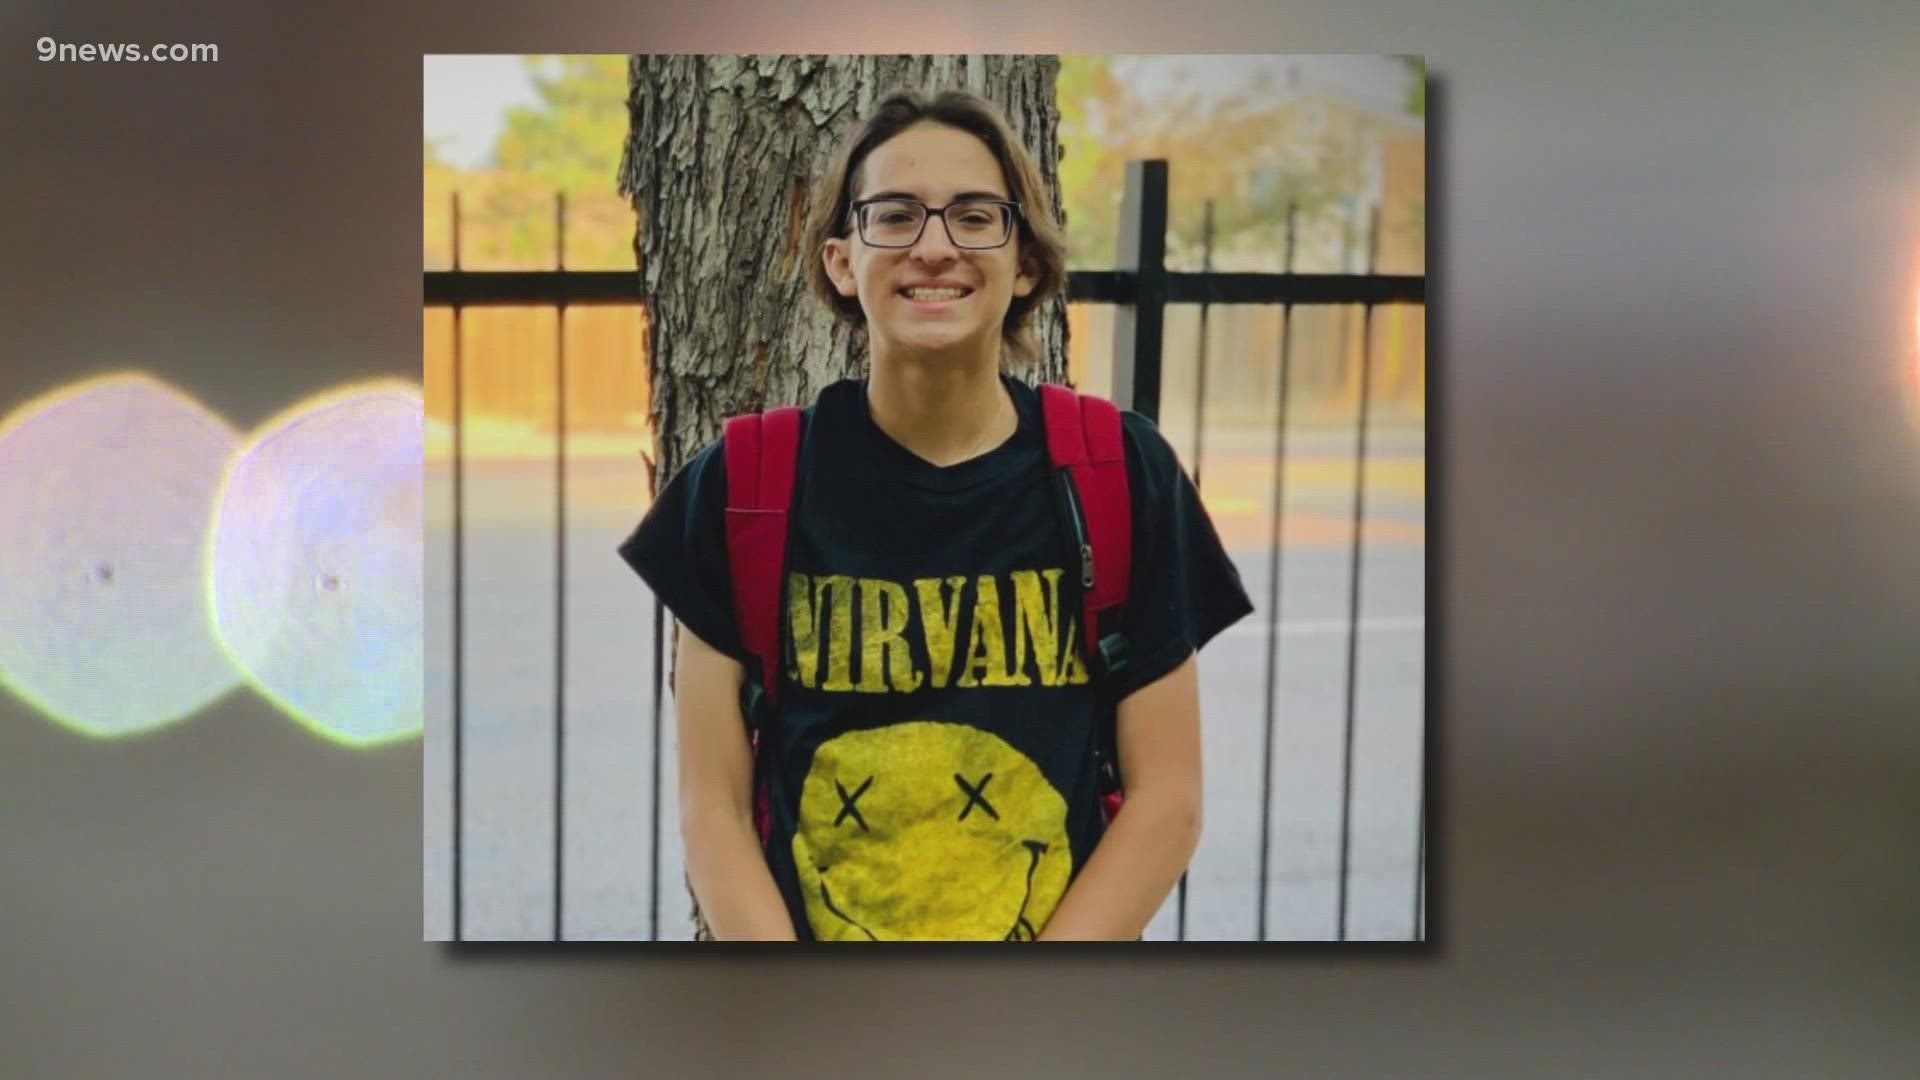 A vigil was planned Monday evening for Wyatt Lobato, who was hit and killed by an SUV near South Chambers Road and East Hampden Circle.